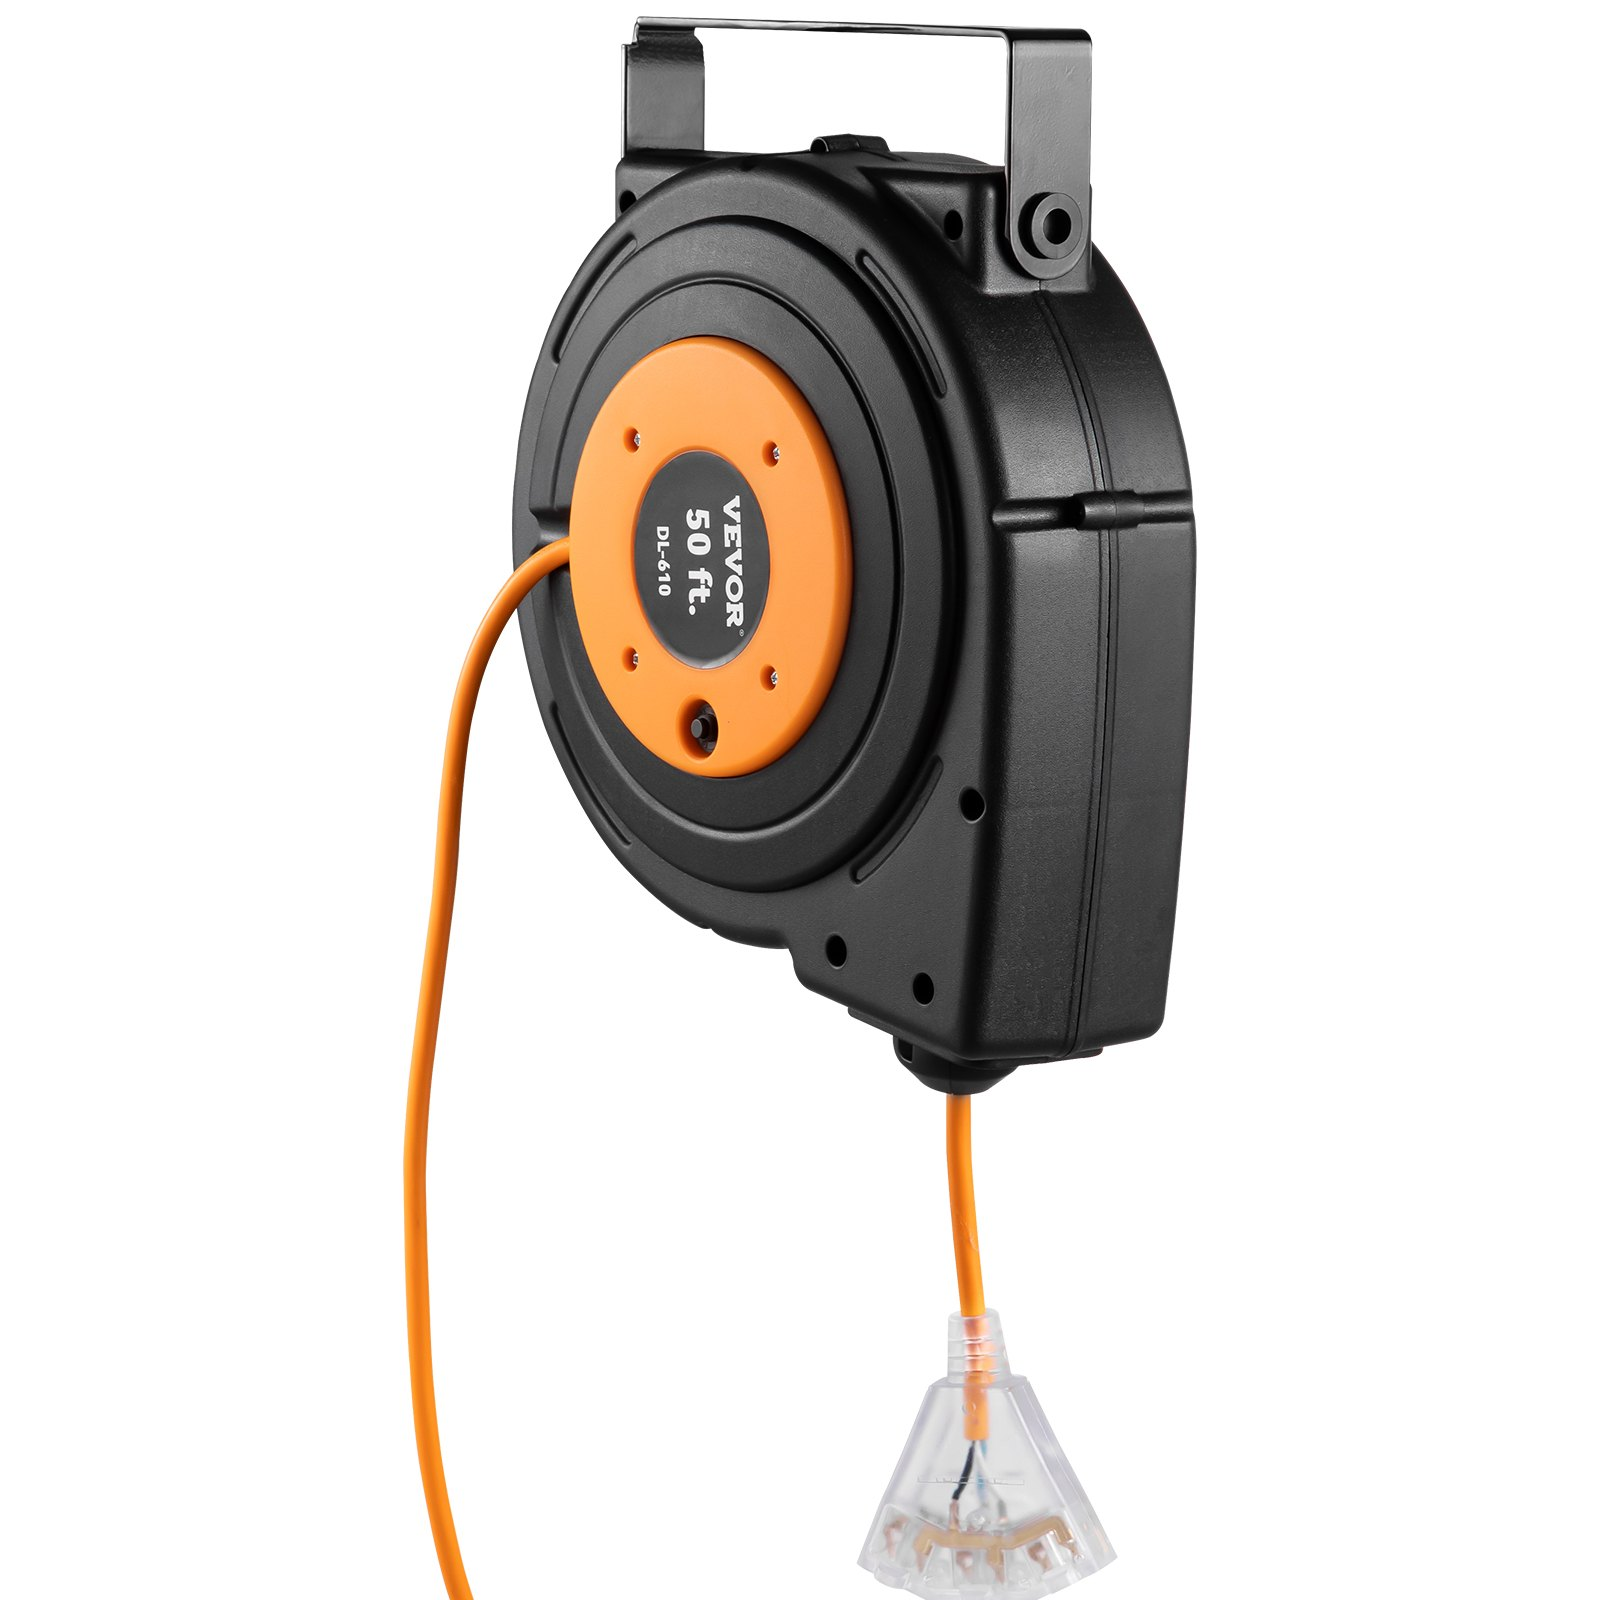 VEVOR Retractable Extension Reel, 50 ft Heavy Duty 14AWG/3C Sjtow Power Cord with Lighted Triple Tap Outlet, 13 Amp Circuit Breaker, 180° Swivel